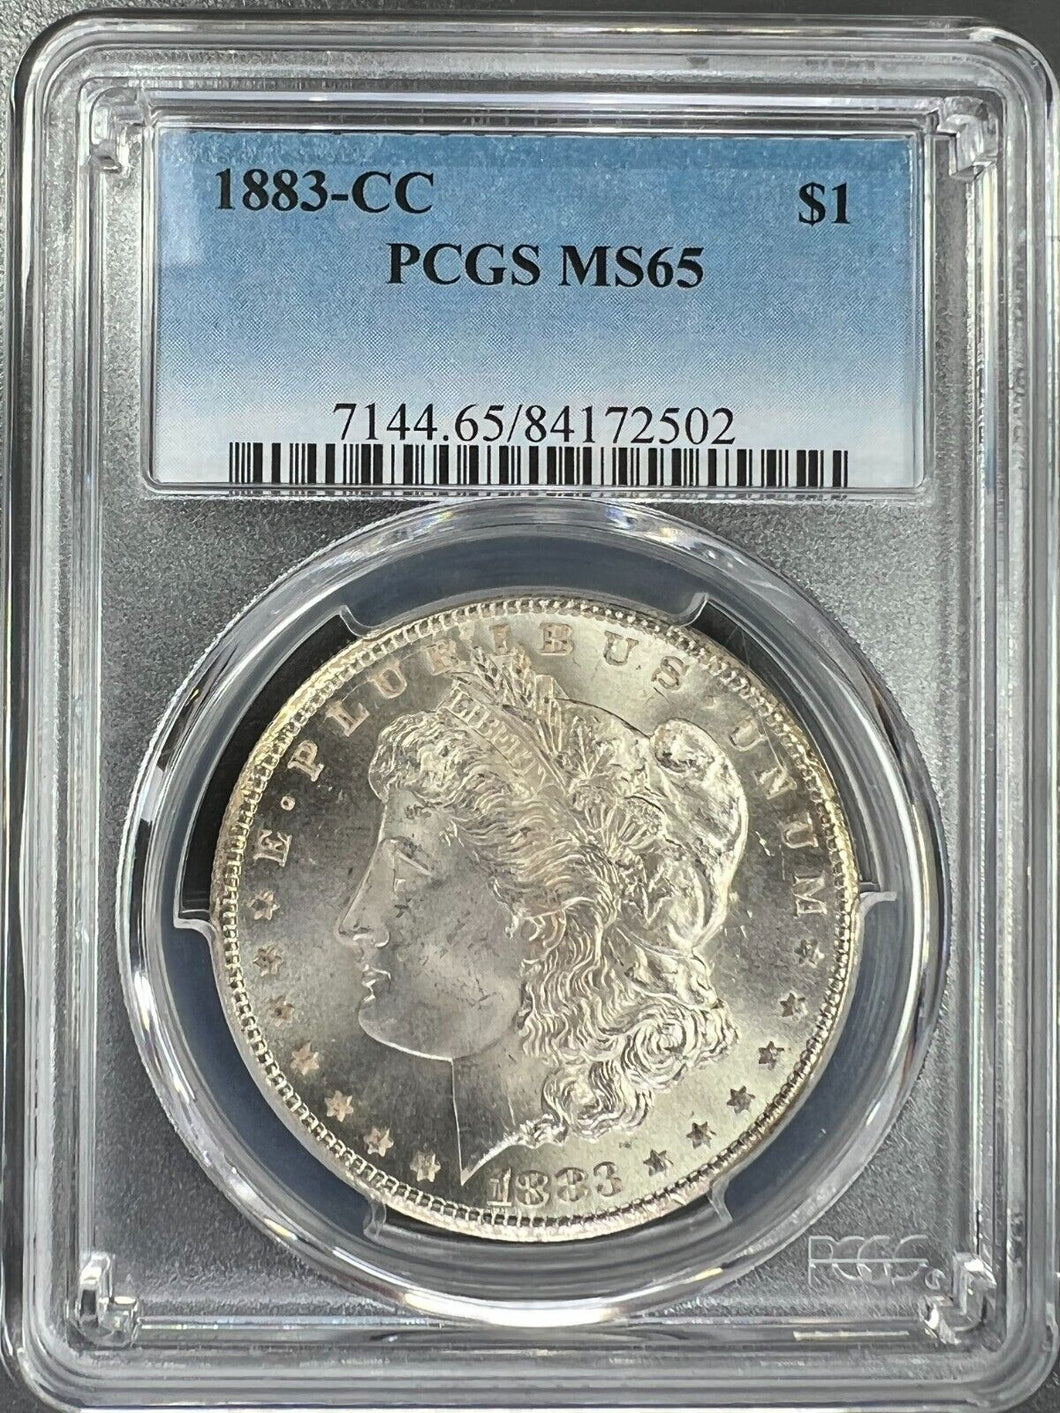 1883-CC Morgan Silver Dollar PCGS MS65 - A Very Frosty Coin - Blast White Too